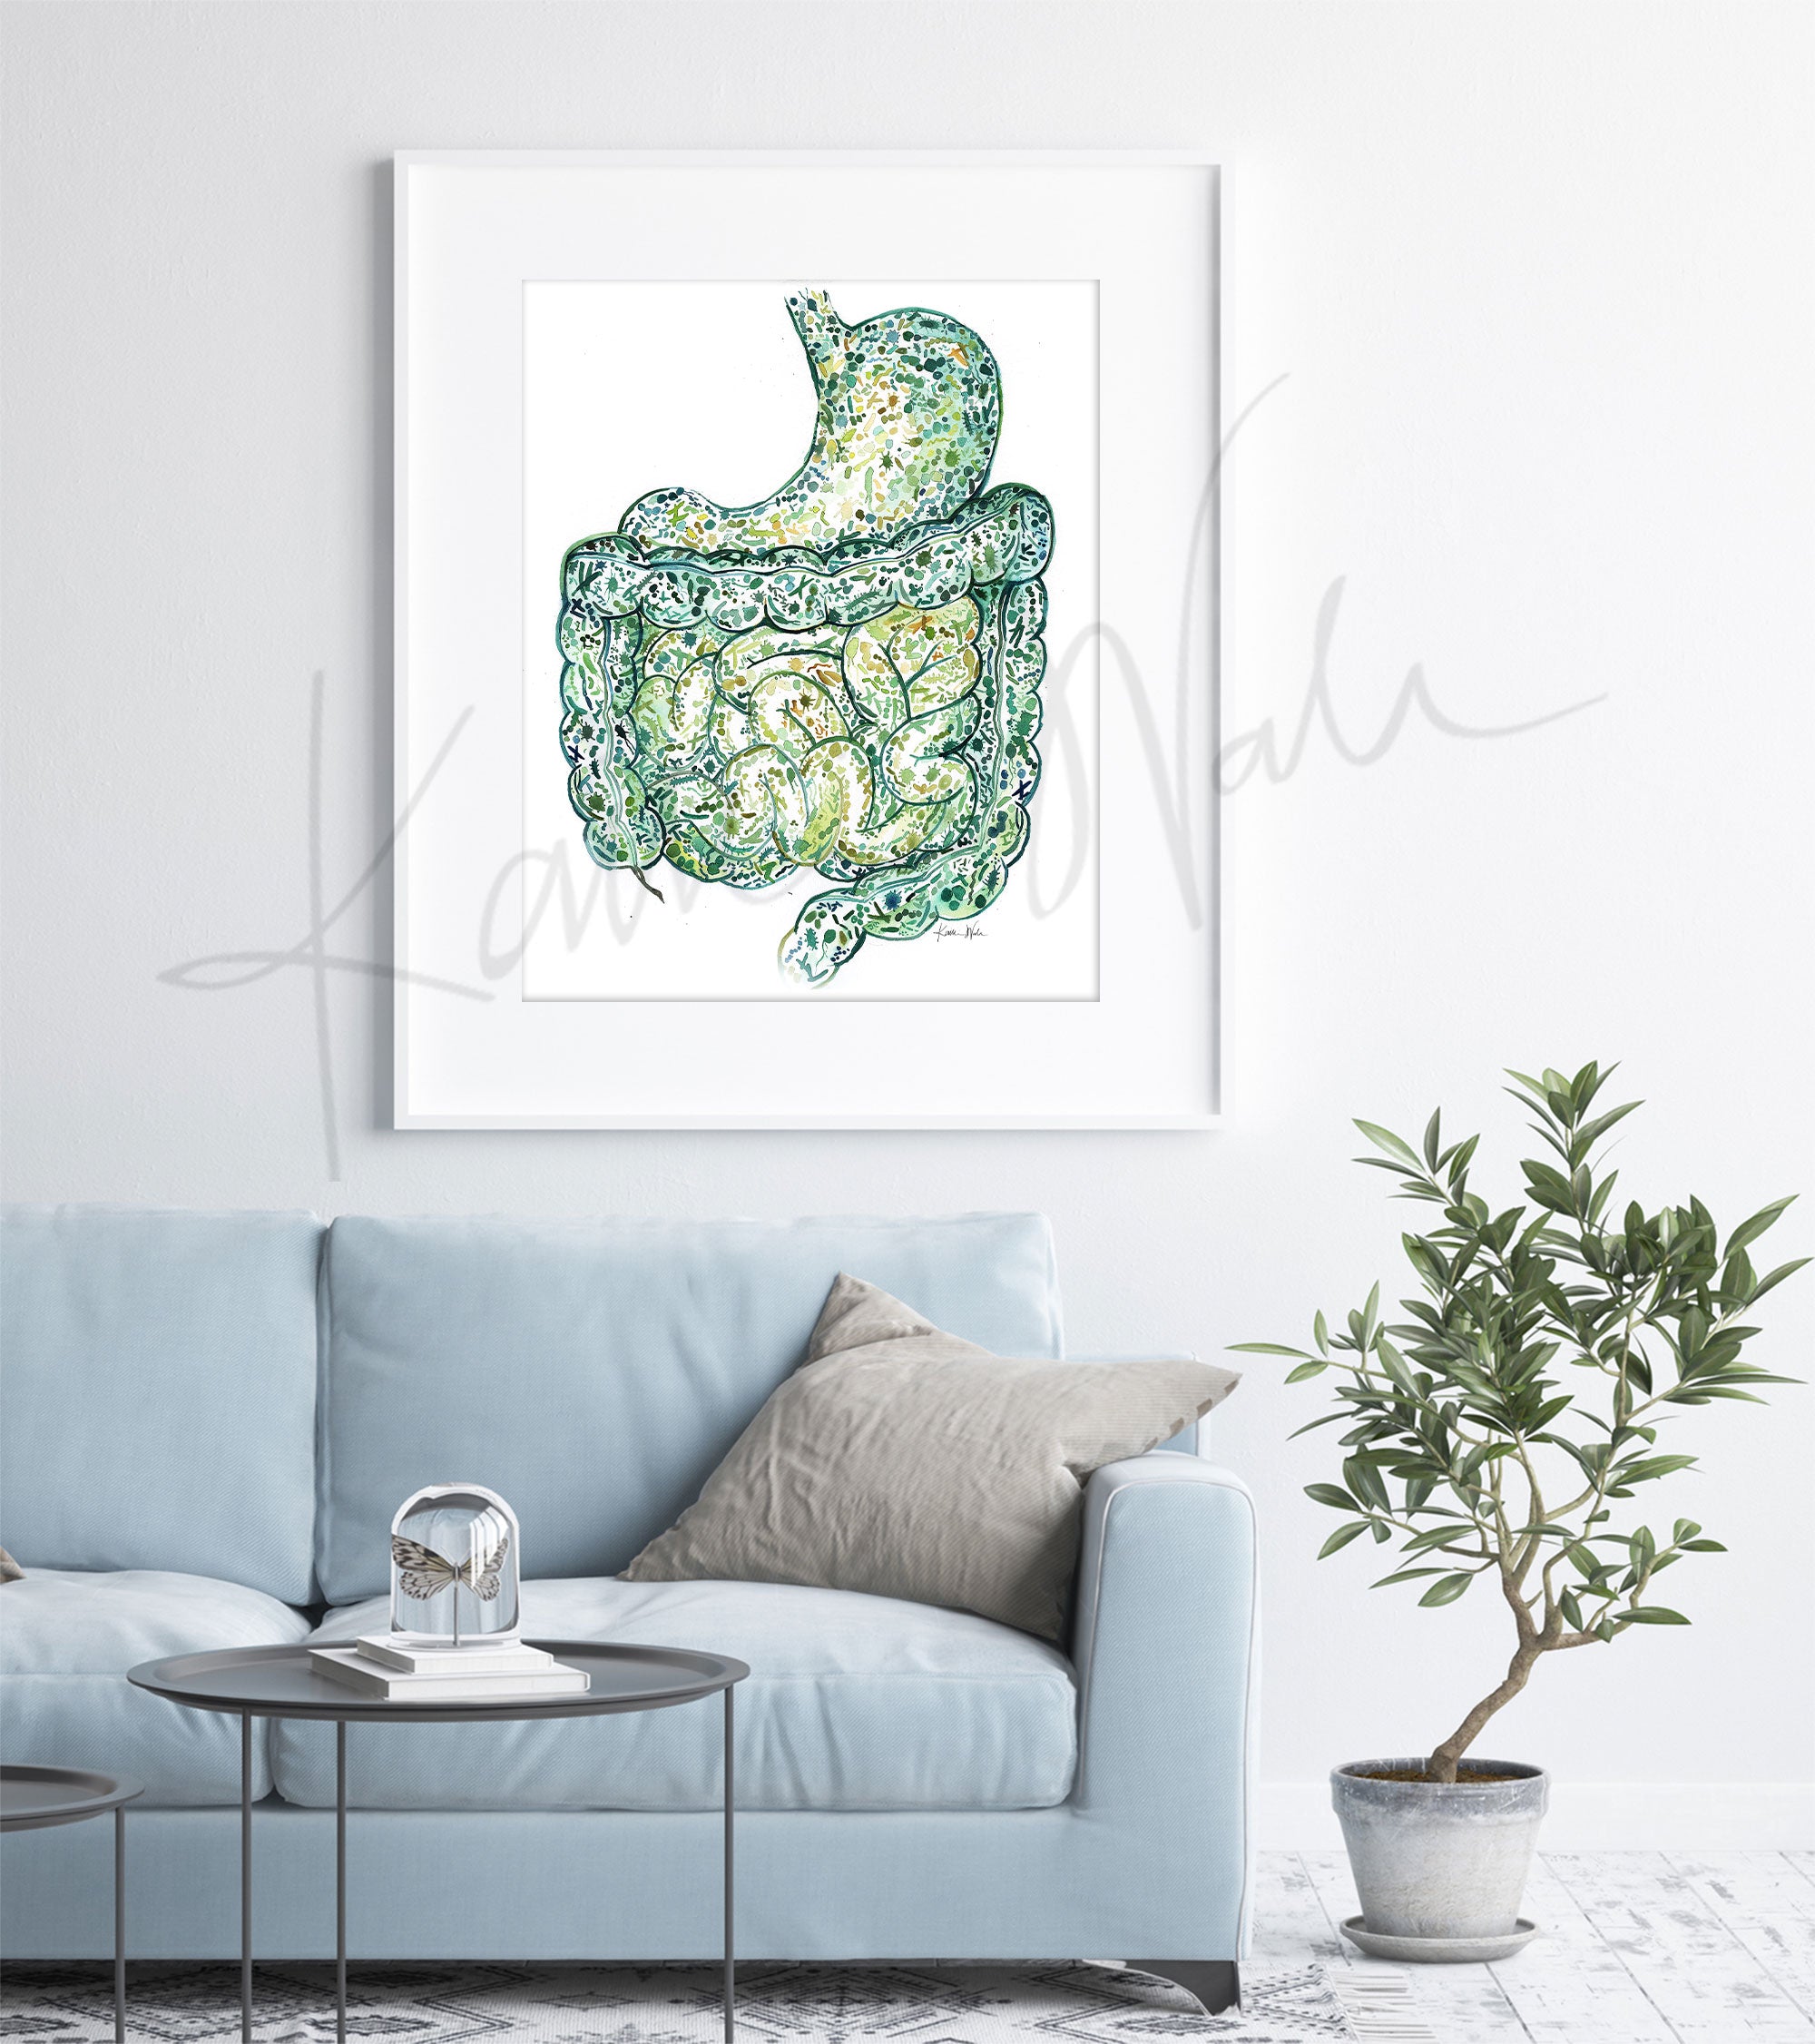 Framed watercolor painting of the stomach and intestines showing the internal gut microbiome. The painting is hanging over a blue couch.